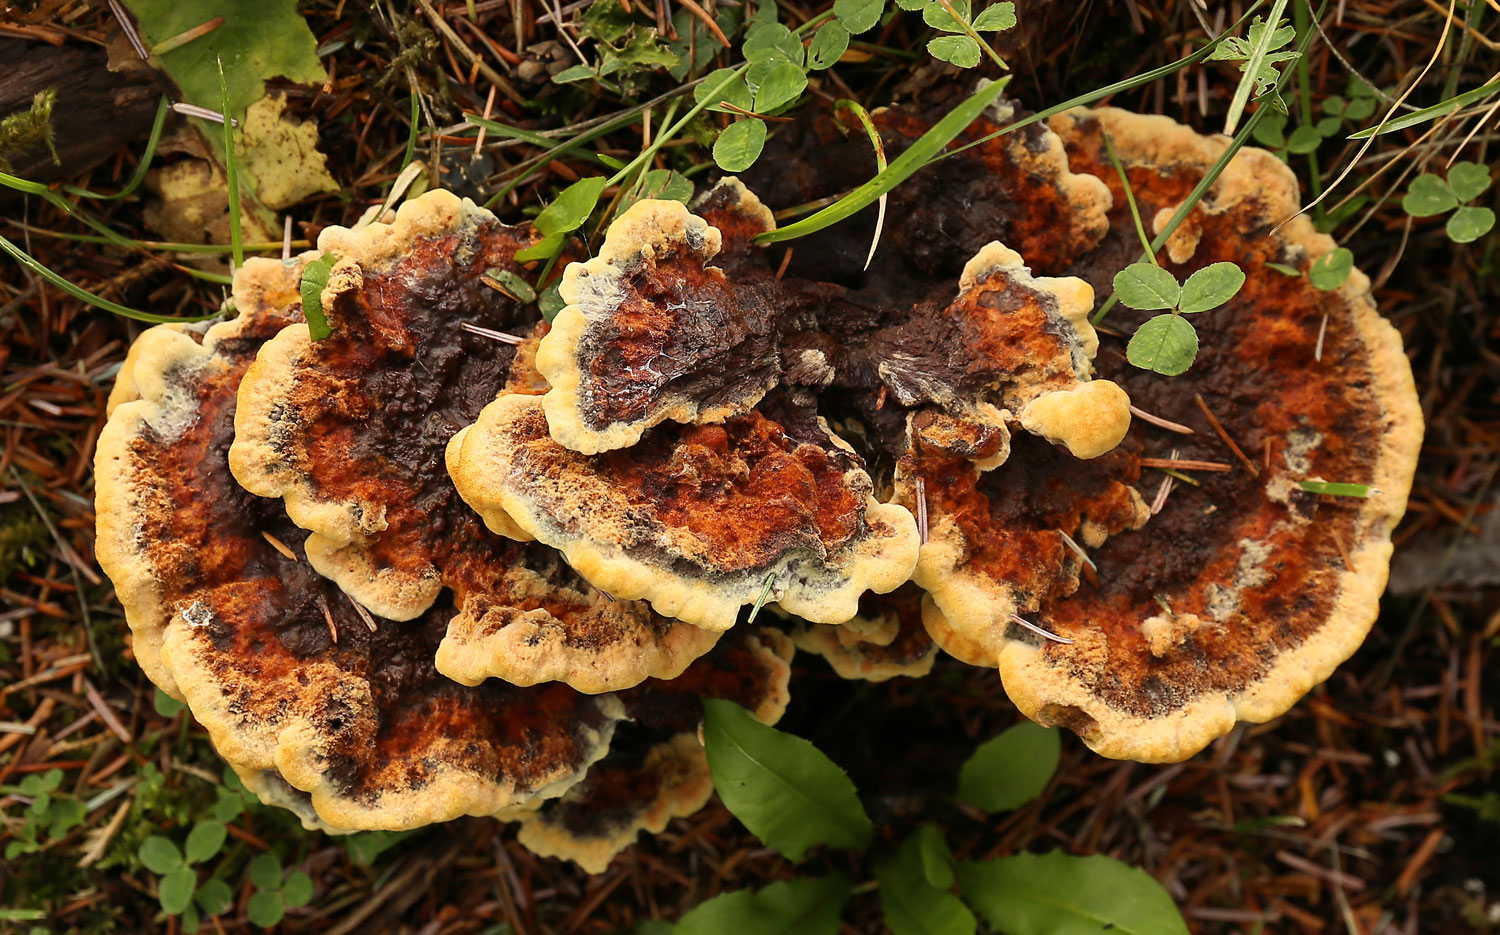 The Dyer's polypore ( Hydnellum suaveolens ) dyes wool yellows, golds, and orange.